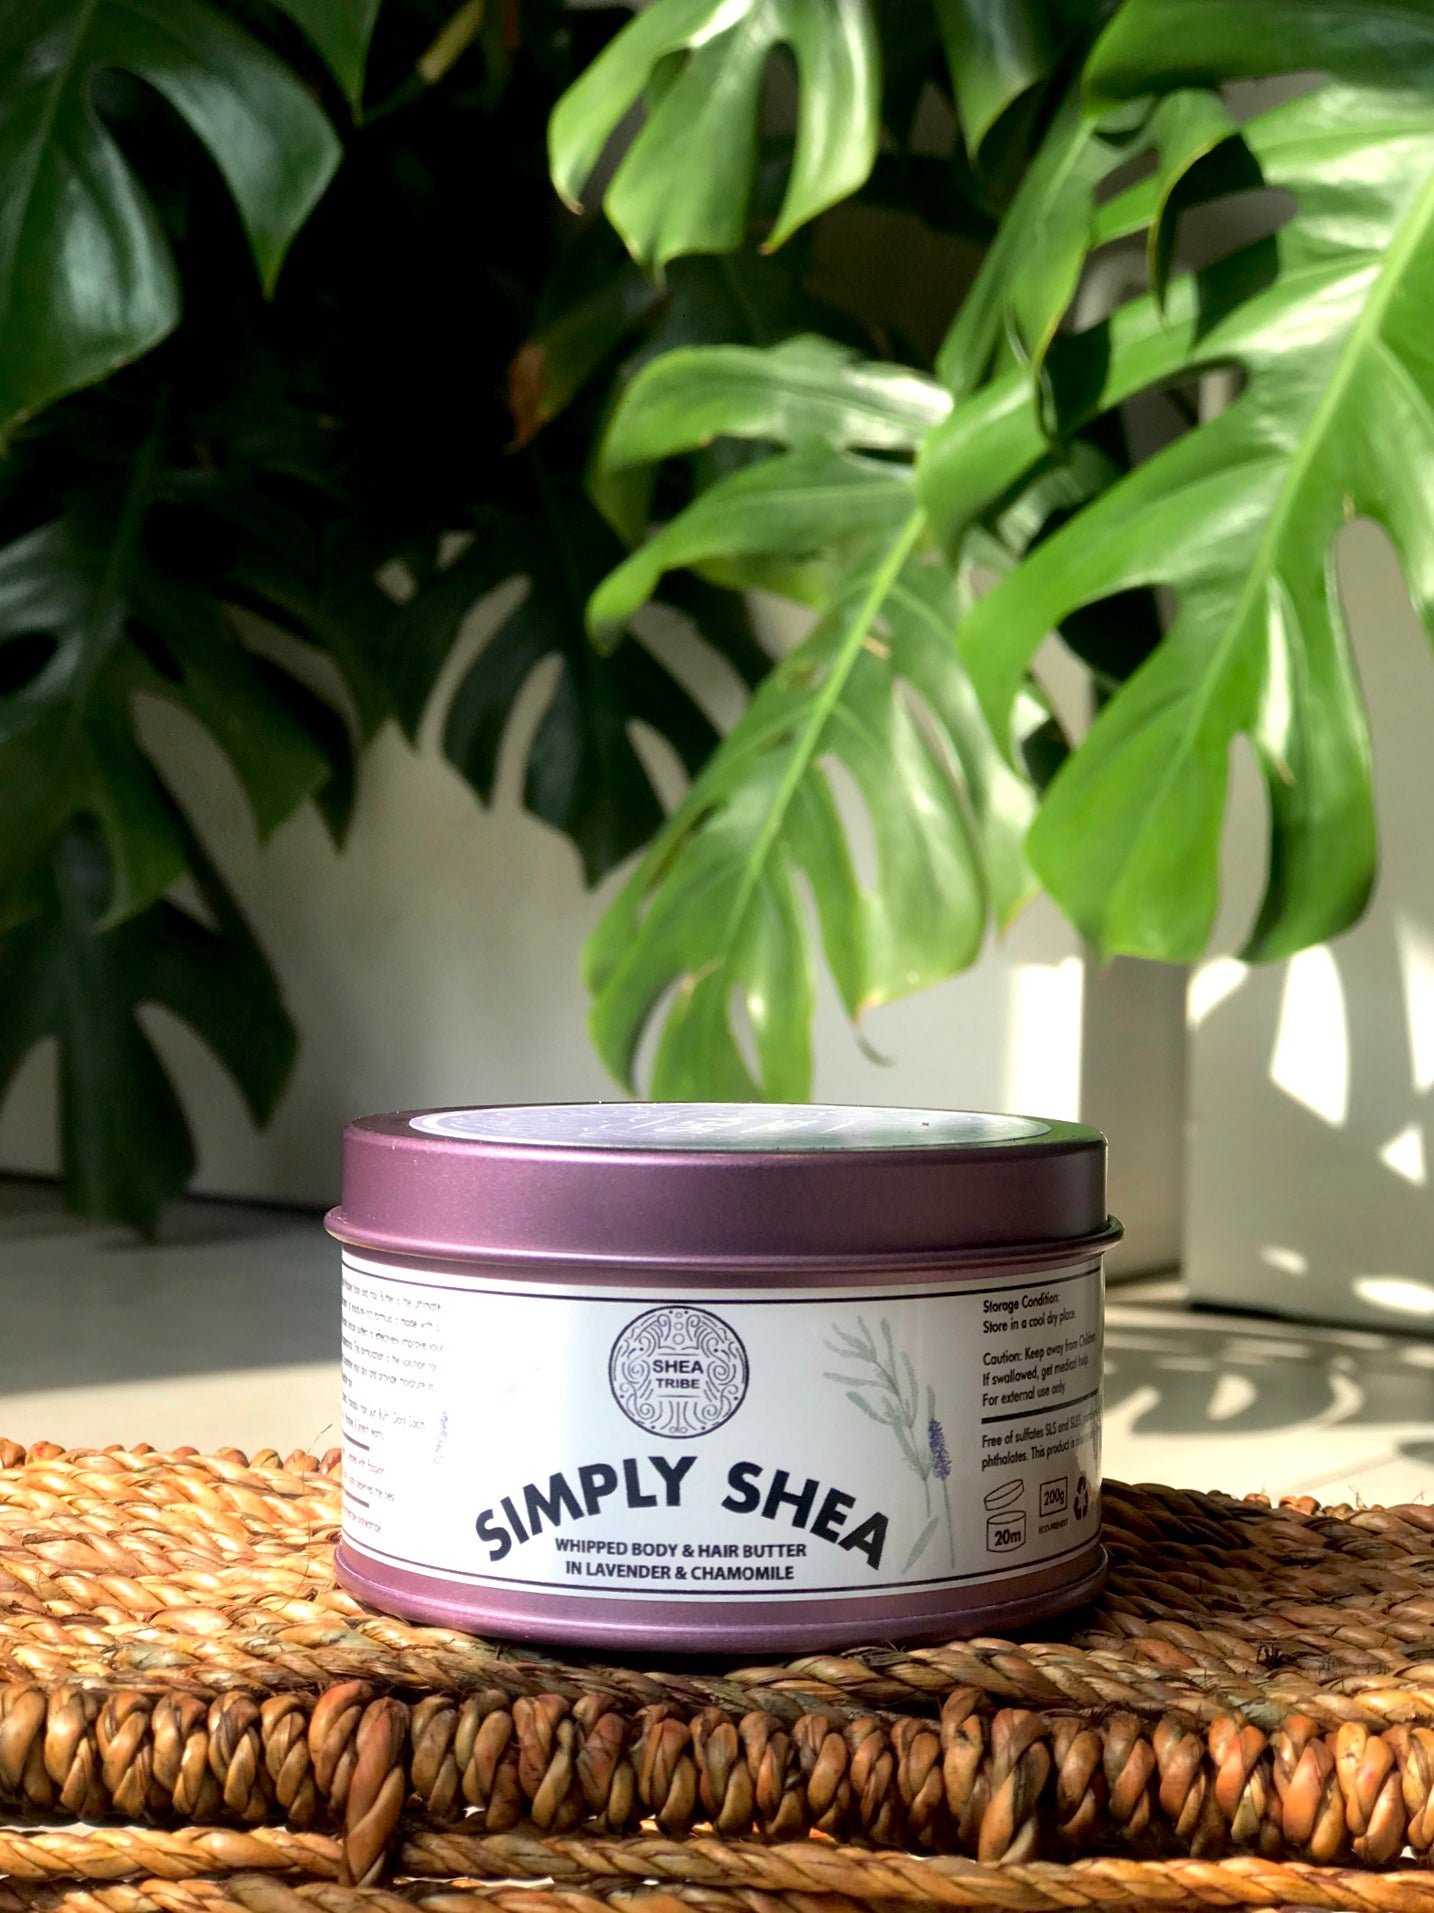 Simply Shea and Cocoa Body & Hair Butter